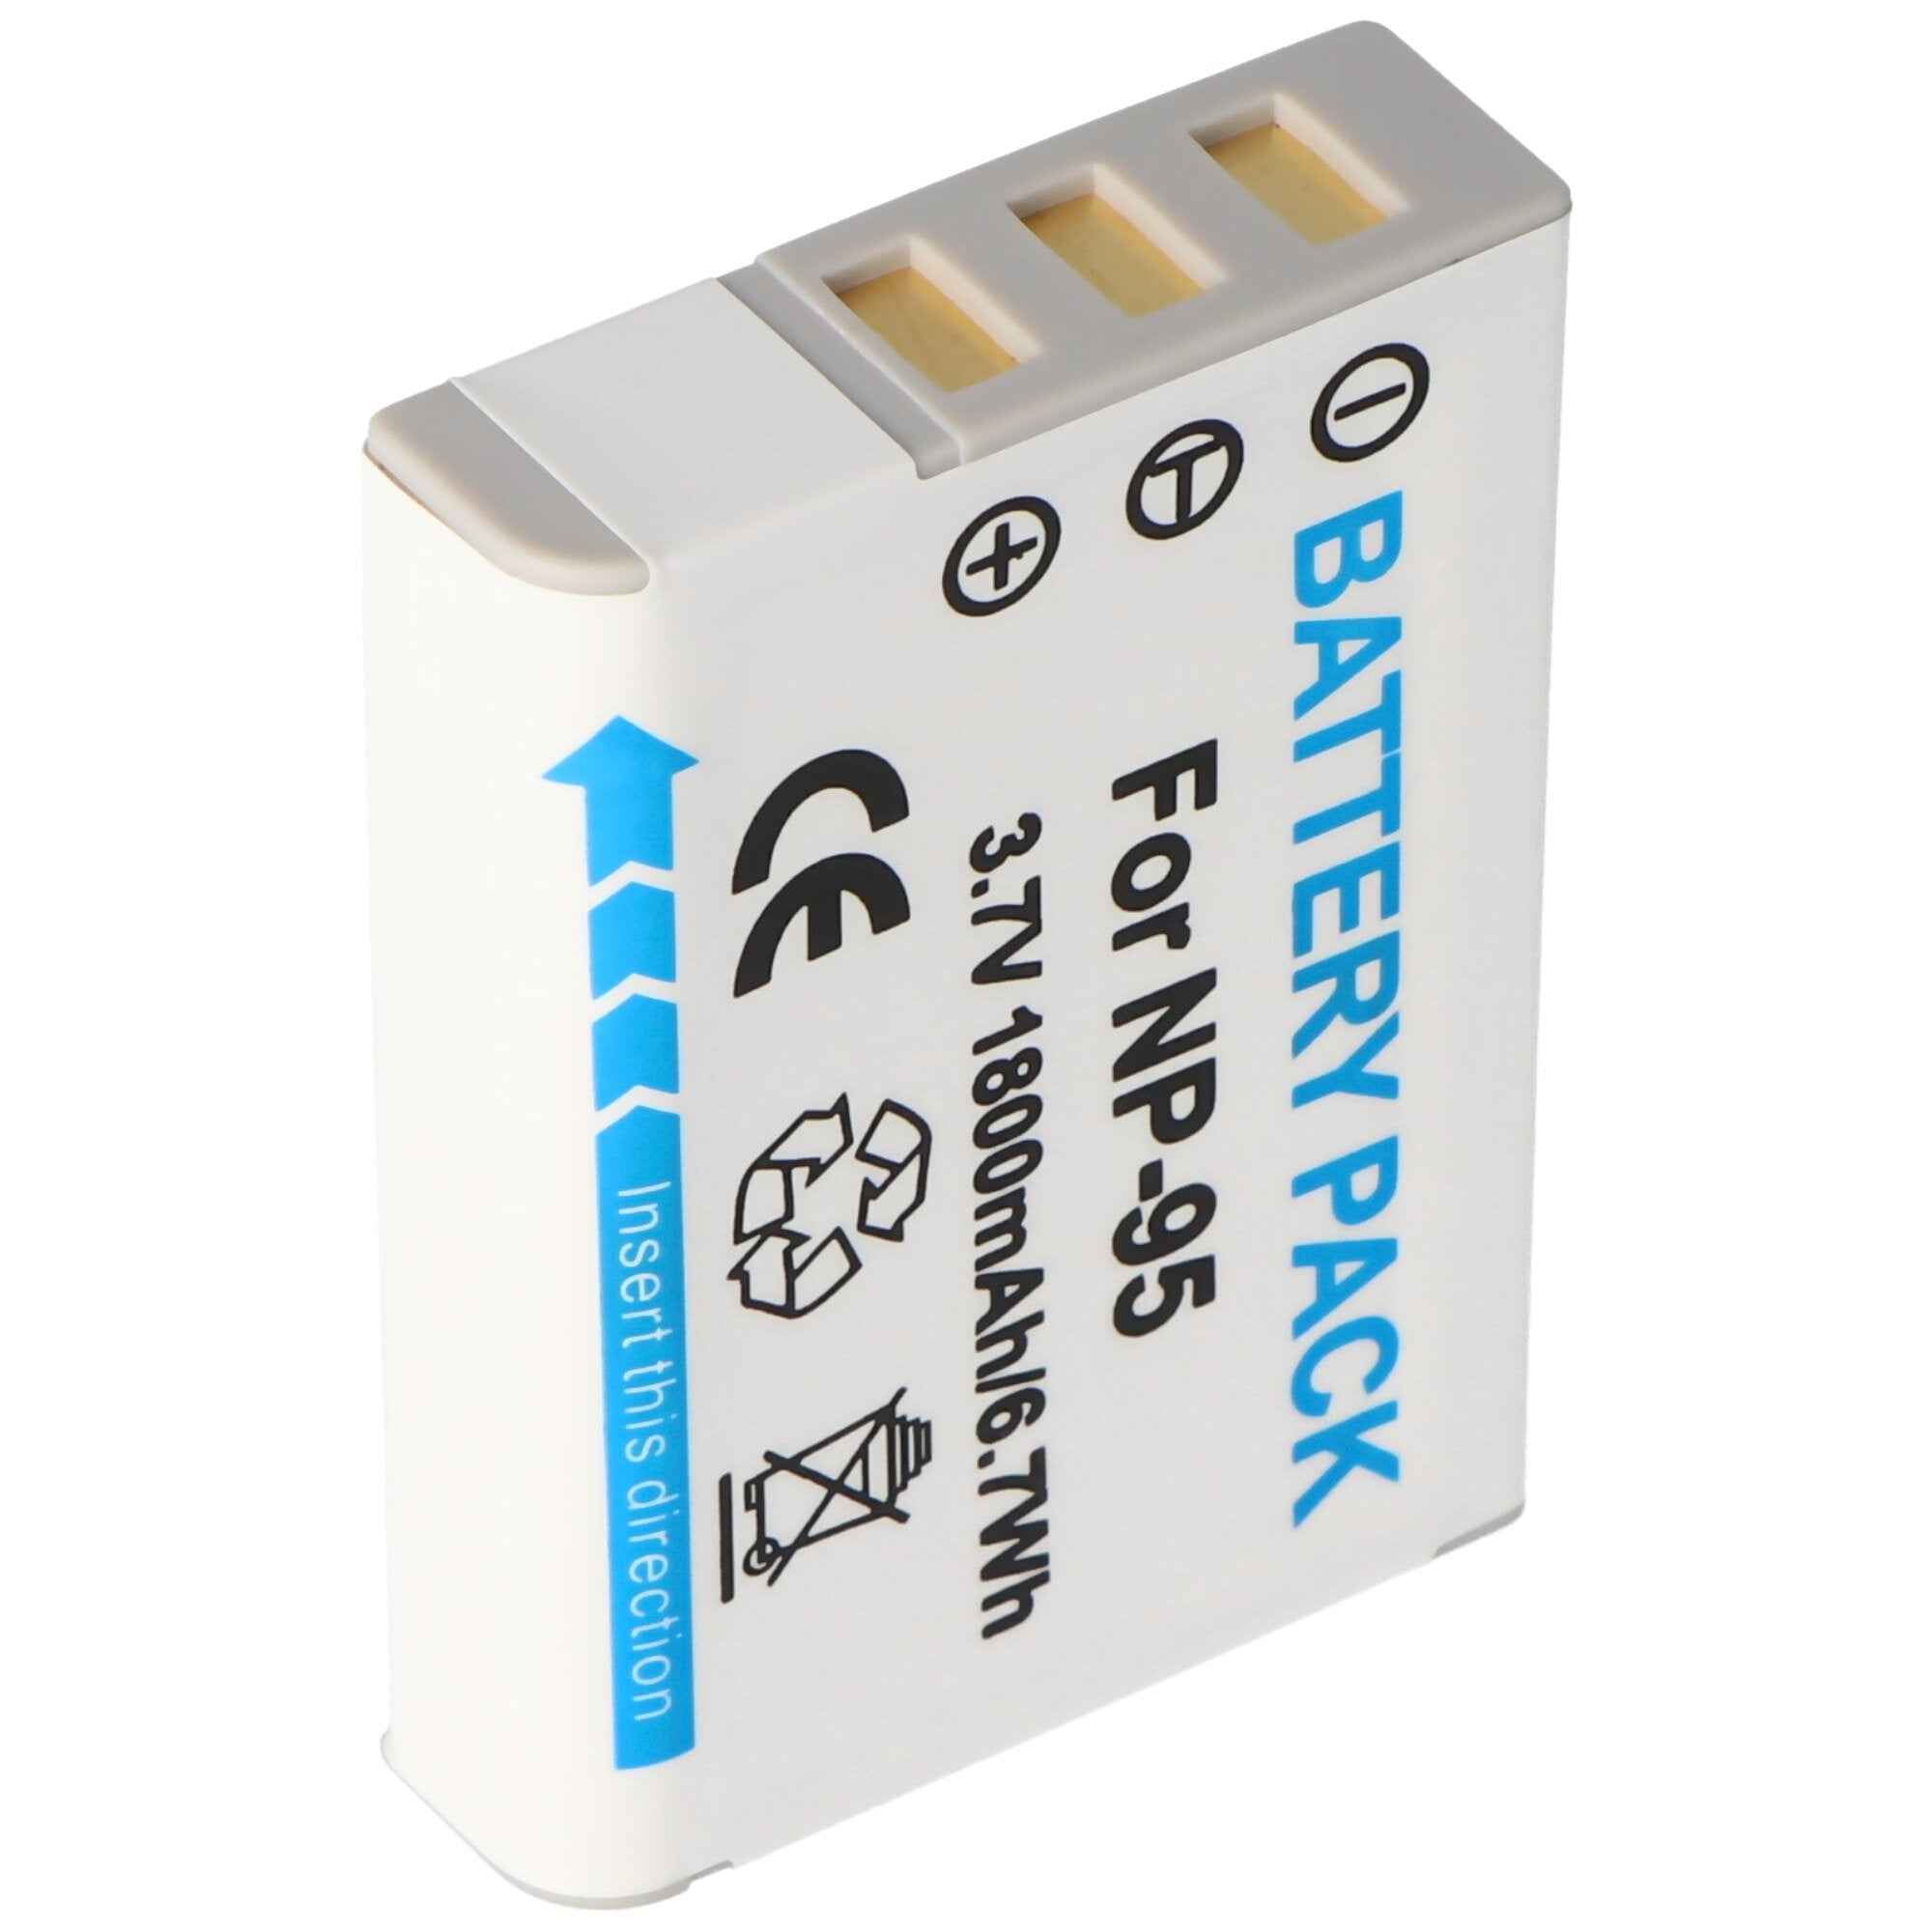 Replica battery suitable for the Fuji NP-95 battery, FinePix F30, X100T